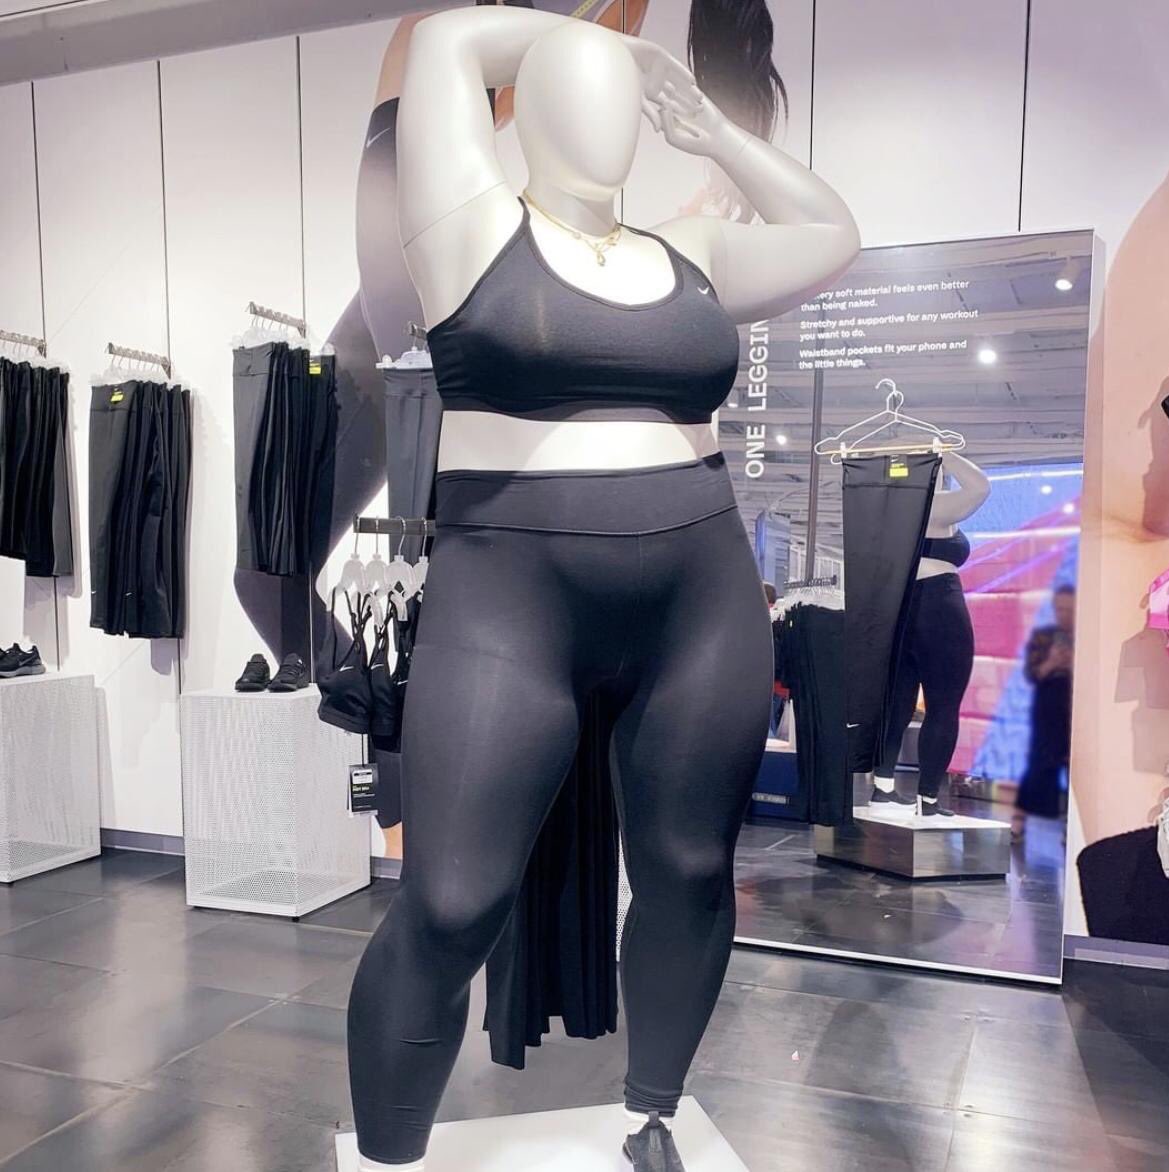 nike obese mannequin